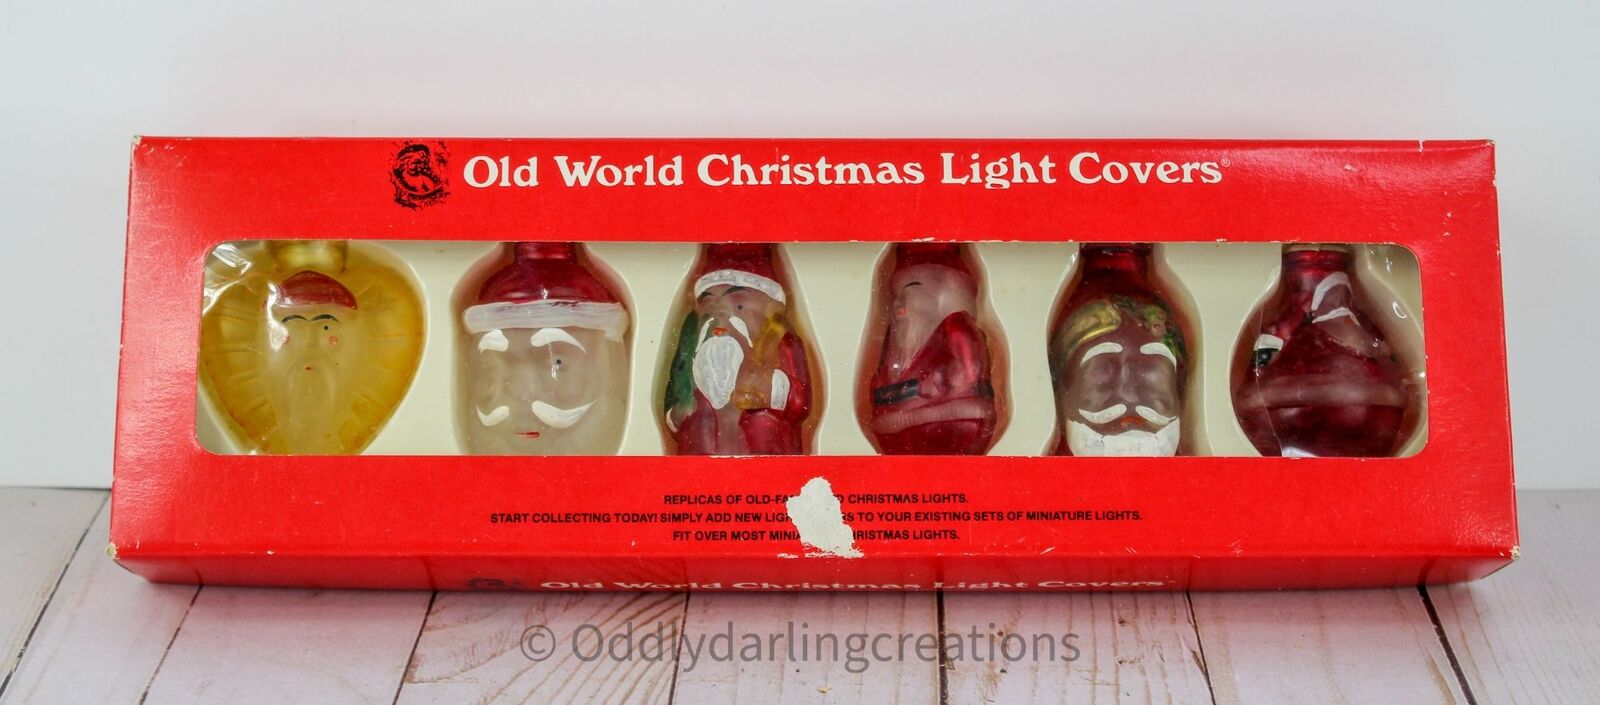 Old World Christmas Light Covers Santa - Set of 6 Glass Covers, Vintage Holiday